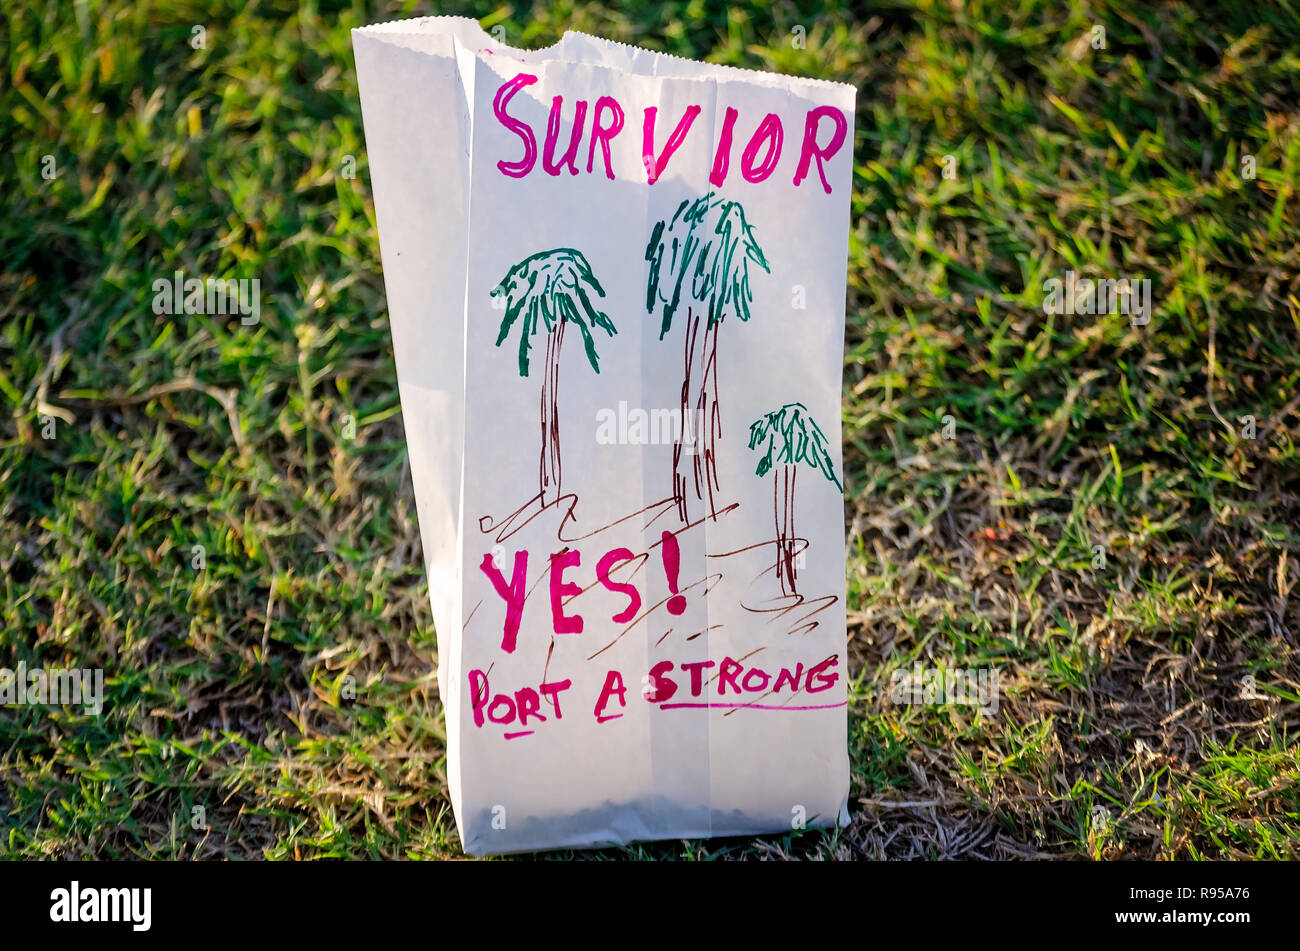 A paper bag containing an electronic votive candle sits in the grass, Aug. 25, 2018, at Roberts Point in Port Aransas, Texas. Stock Photo